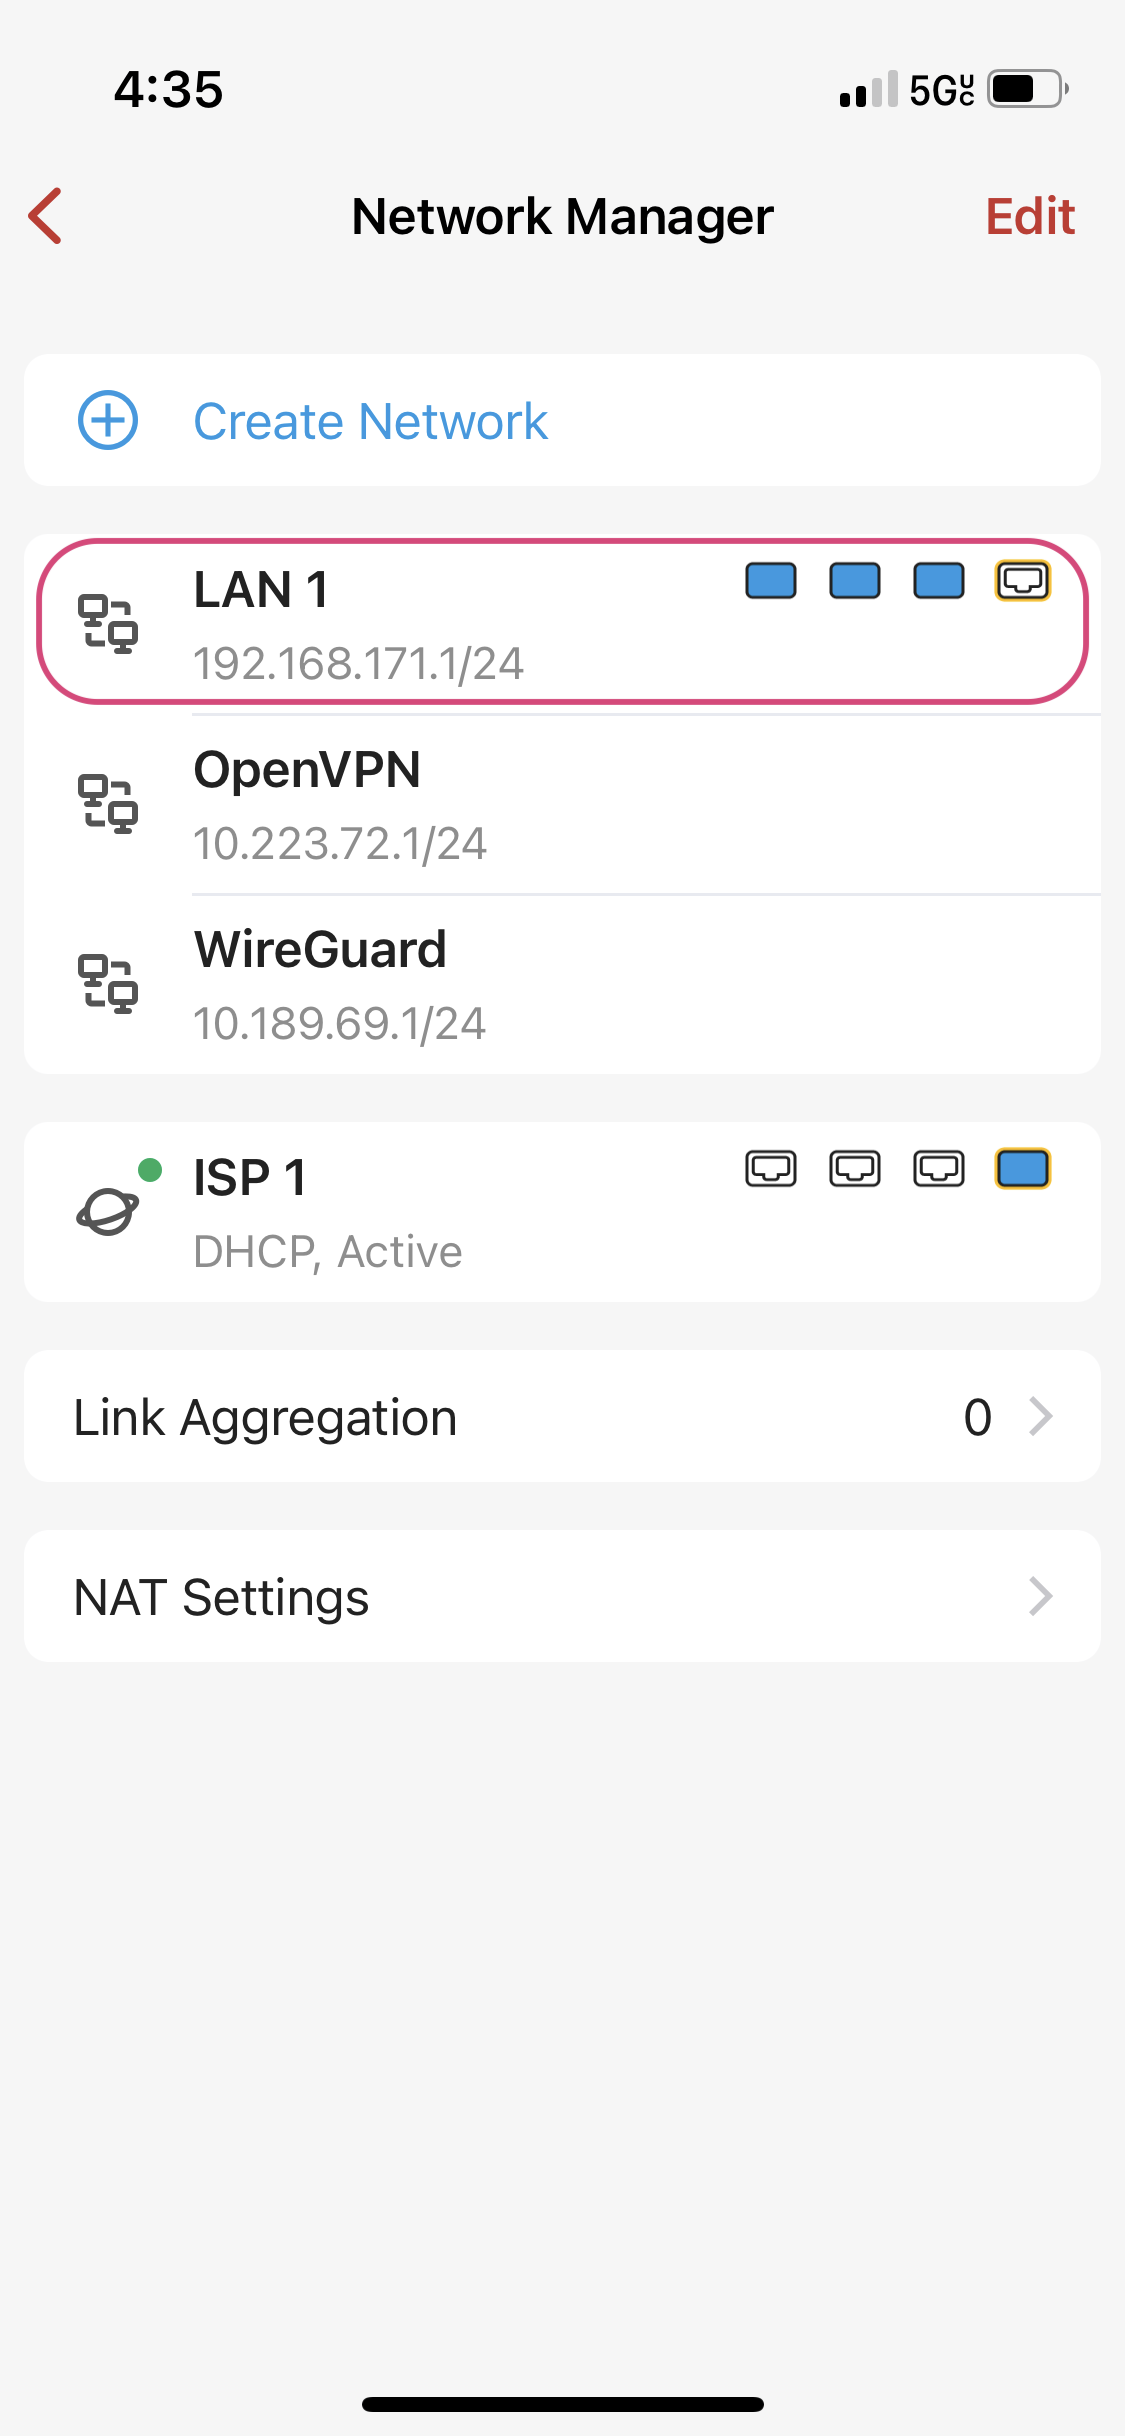 List of Networks within Firewalla Network Manager